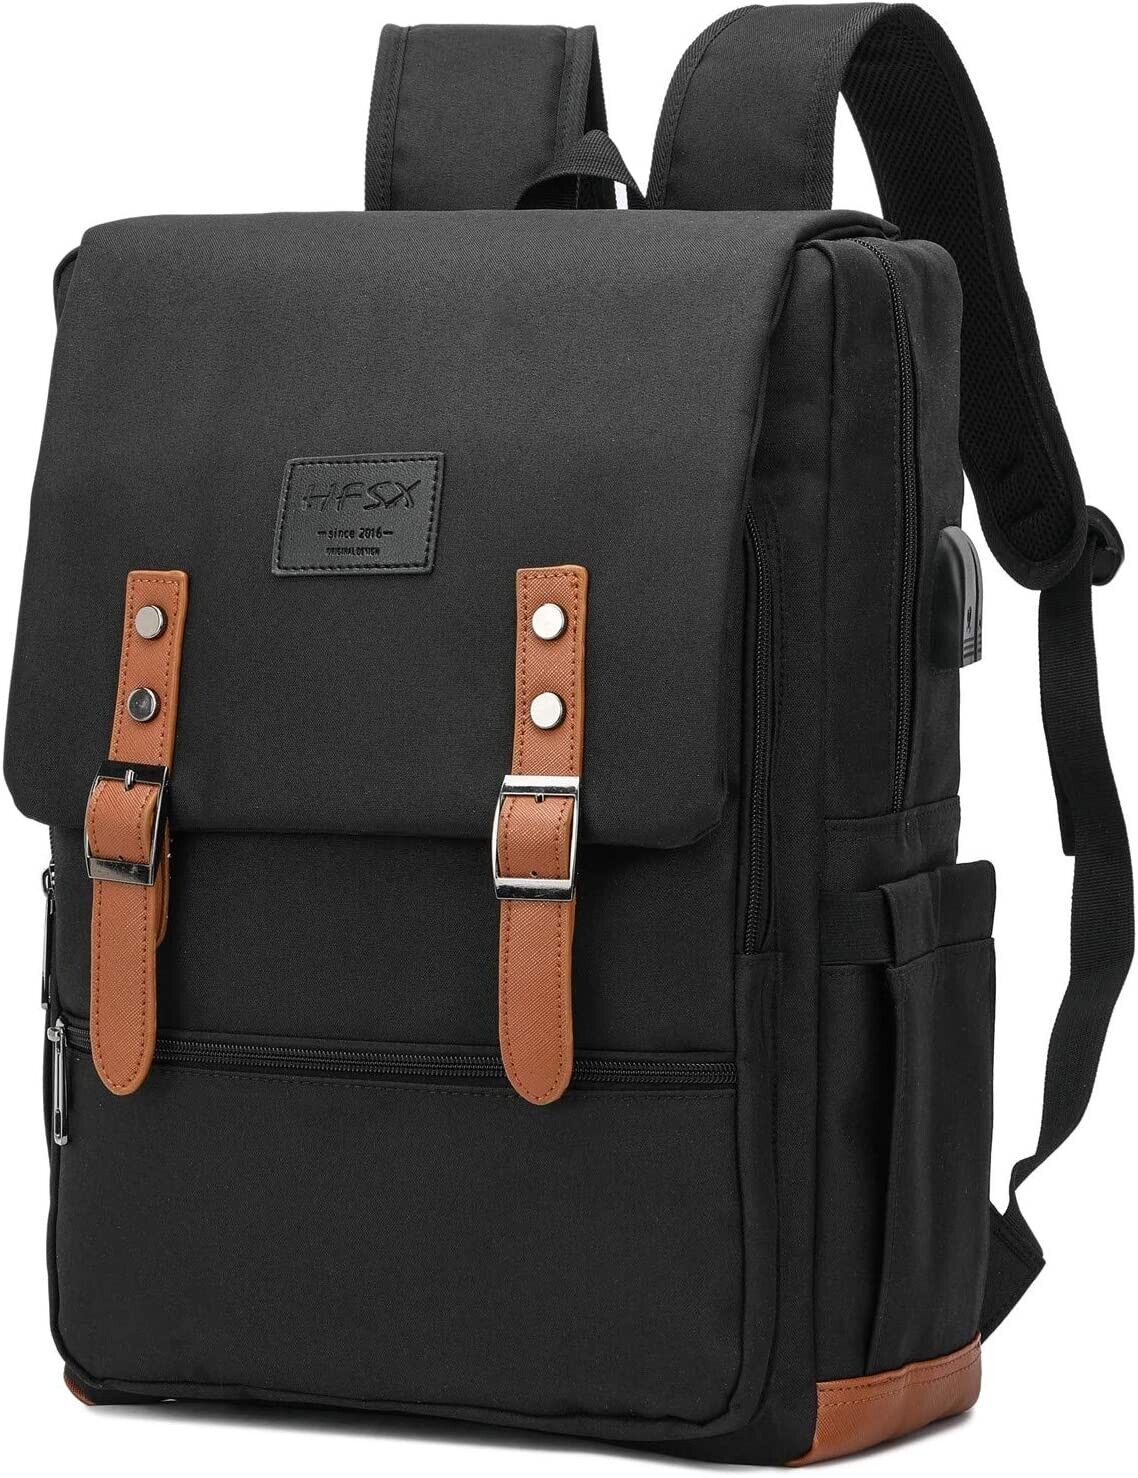 HFSX Vintage Anti Theft Laptop Backpack (fits Up To 15.6 Laptop)